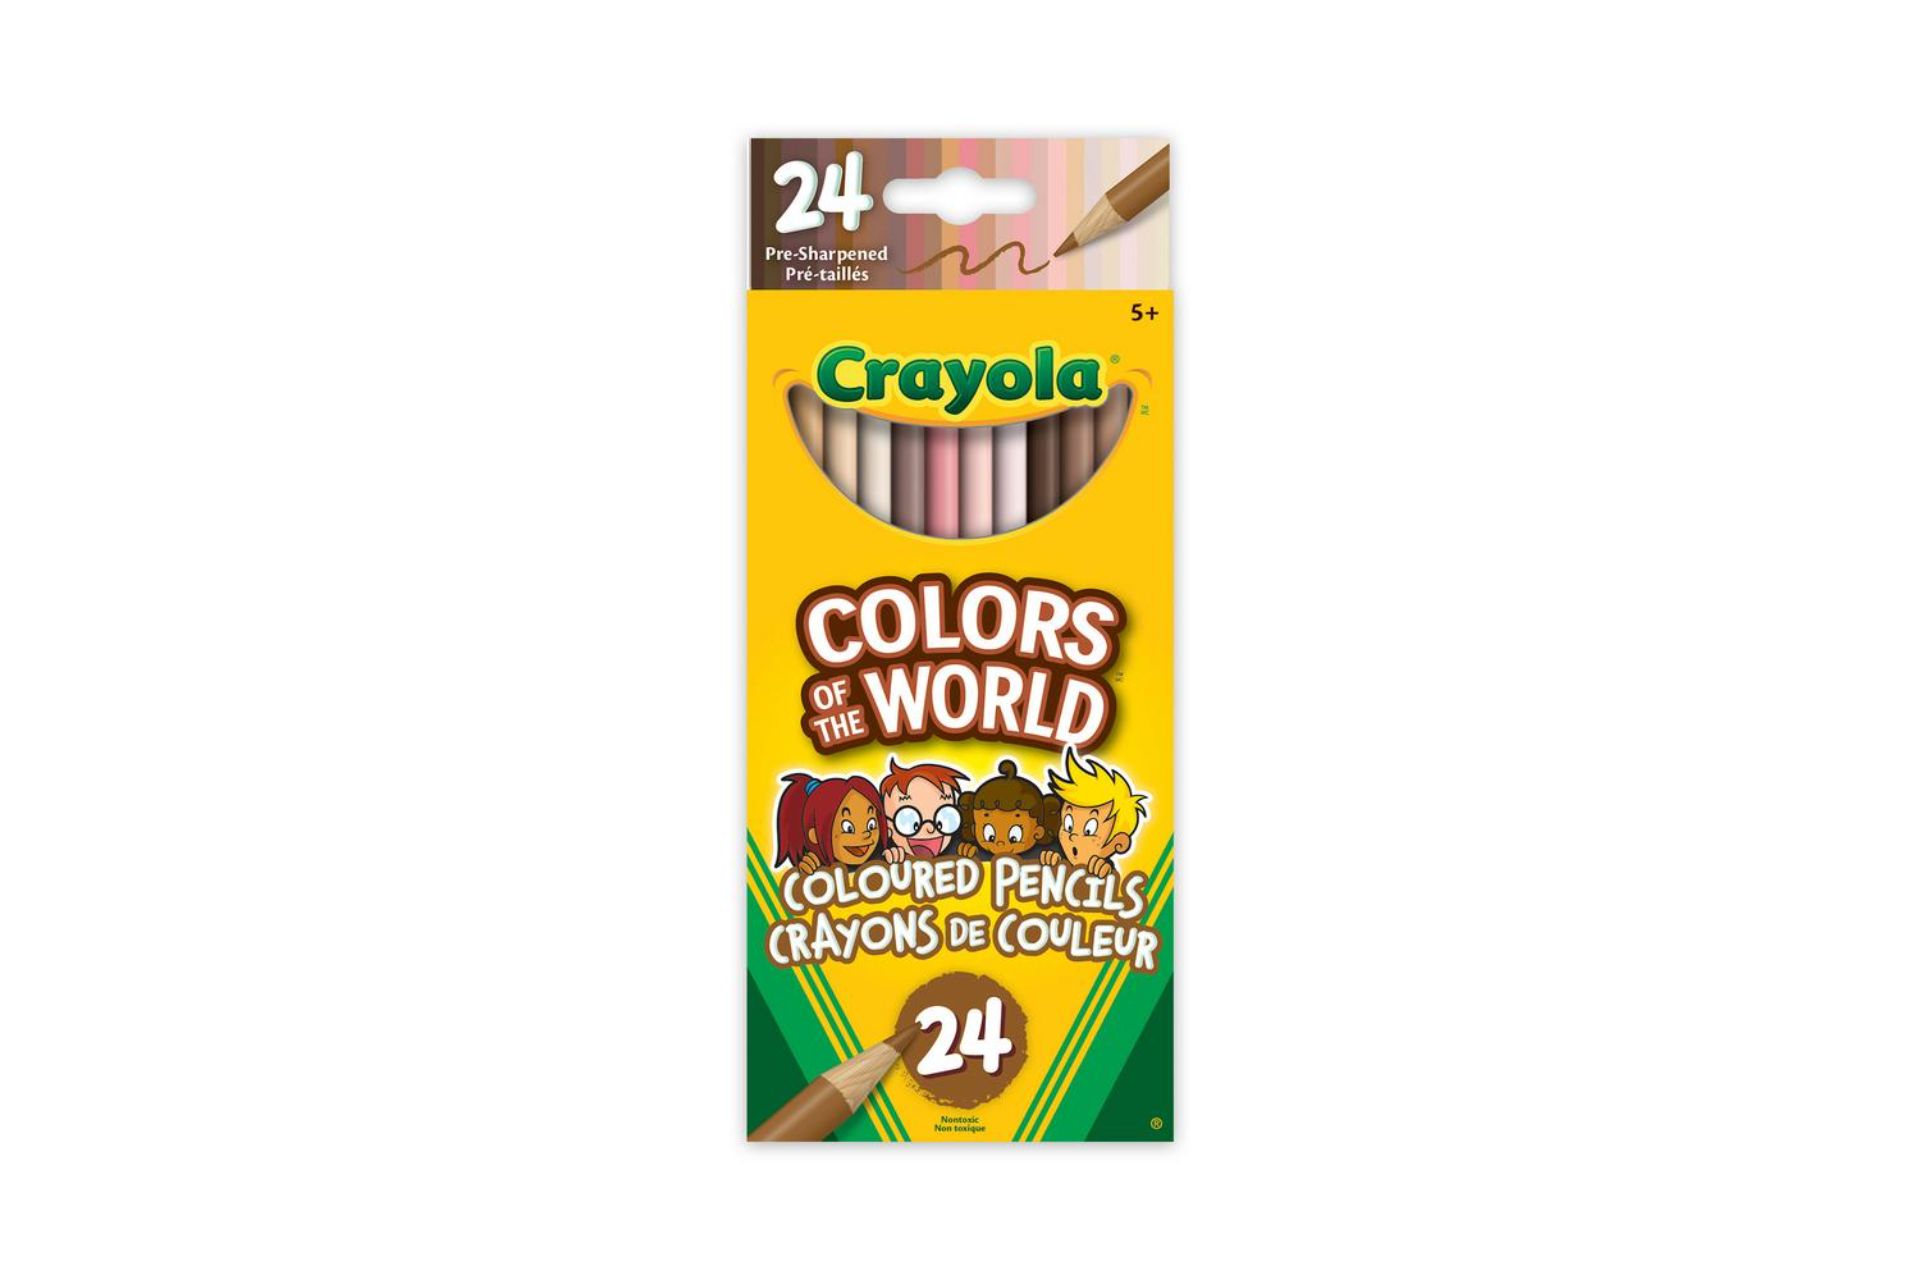 Crayola colors of the world skin tone coloured pencils - 20+ cool products for back to school